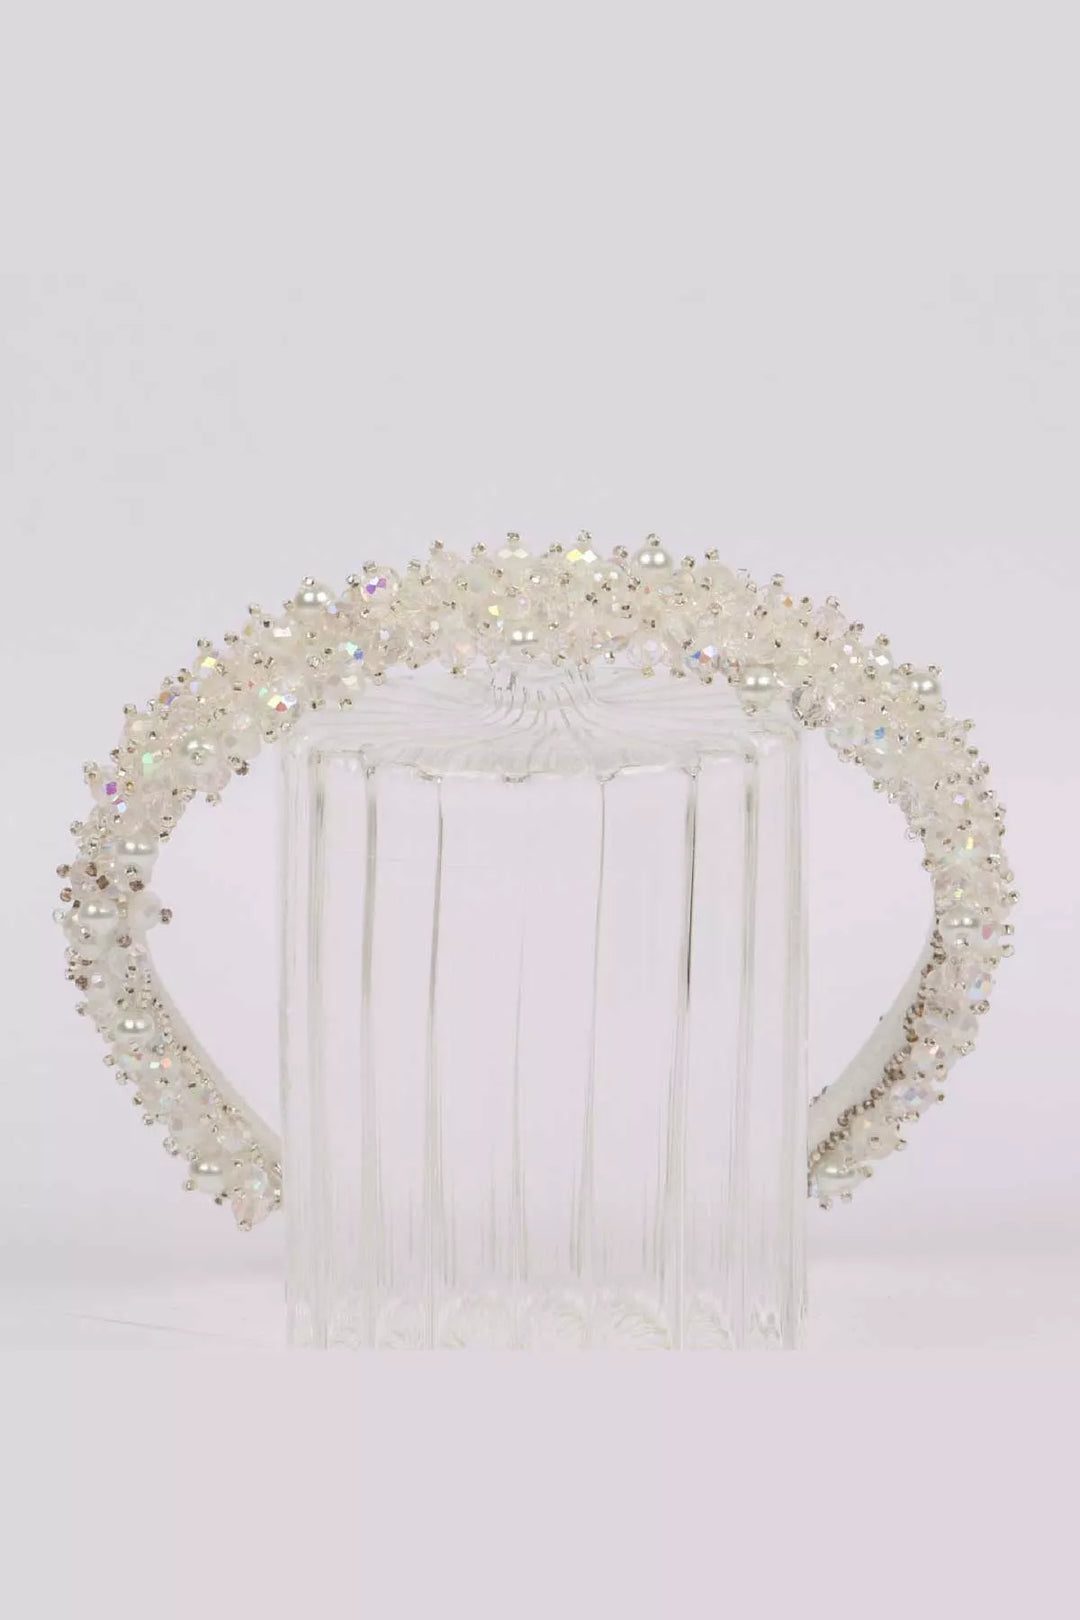 A crystal white hair crown for girls.